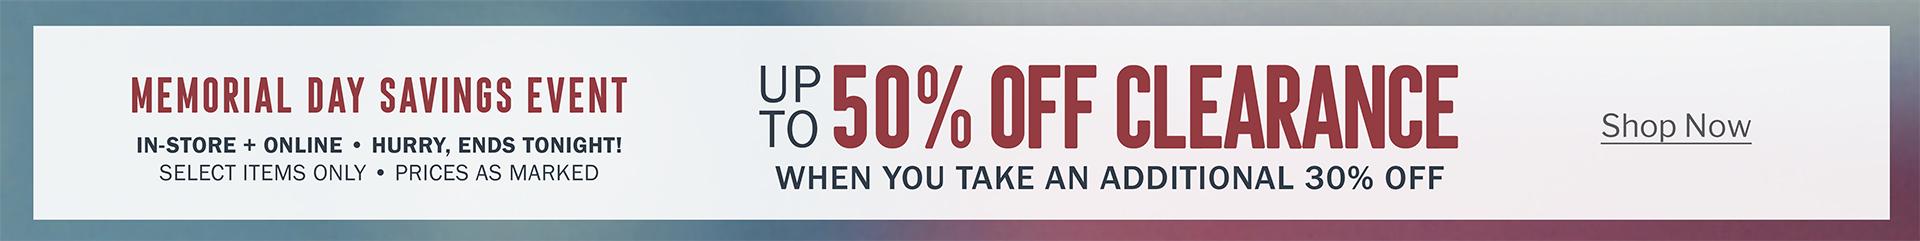 NOW THRU MONDAY, MAY 29 | Memorial Day SAVINGS Event | UP TO 50% OFF CLEARANCE WHEN YOU TAKE AN ADDITIONAL 30% OFF | IN-STORE + ONLINE | SELECT ITEMS | PRICES AS MARKED | START SAVING NOW